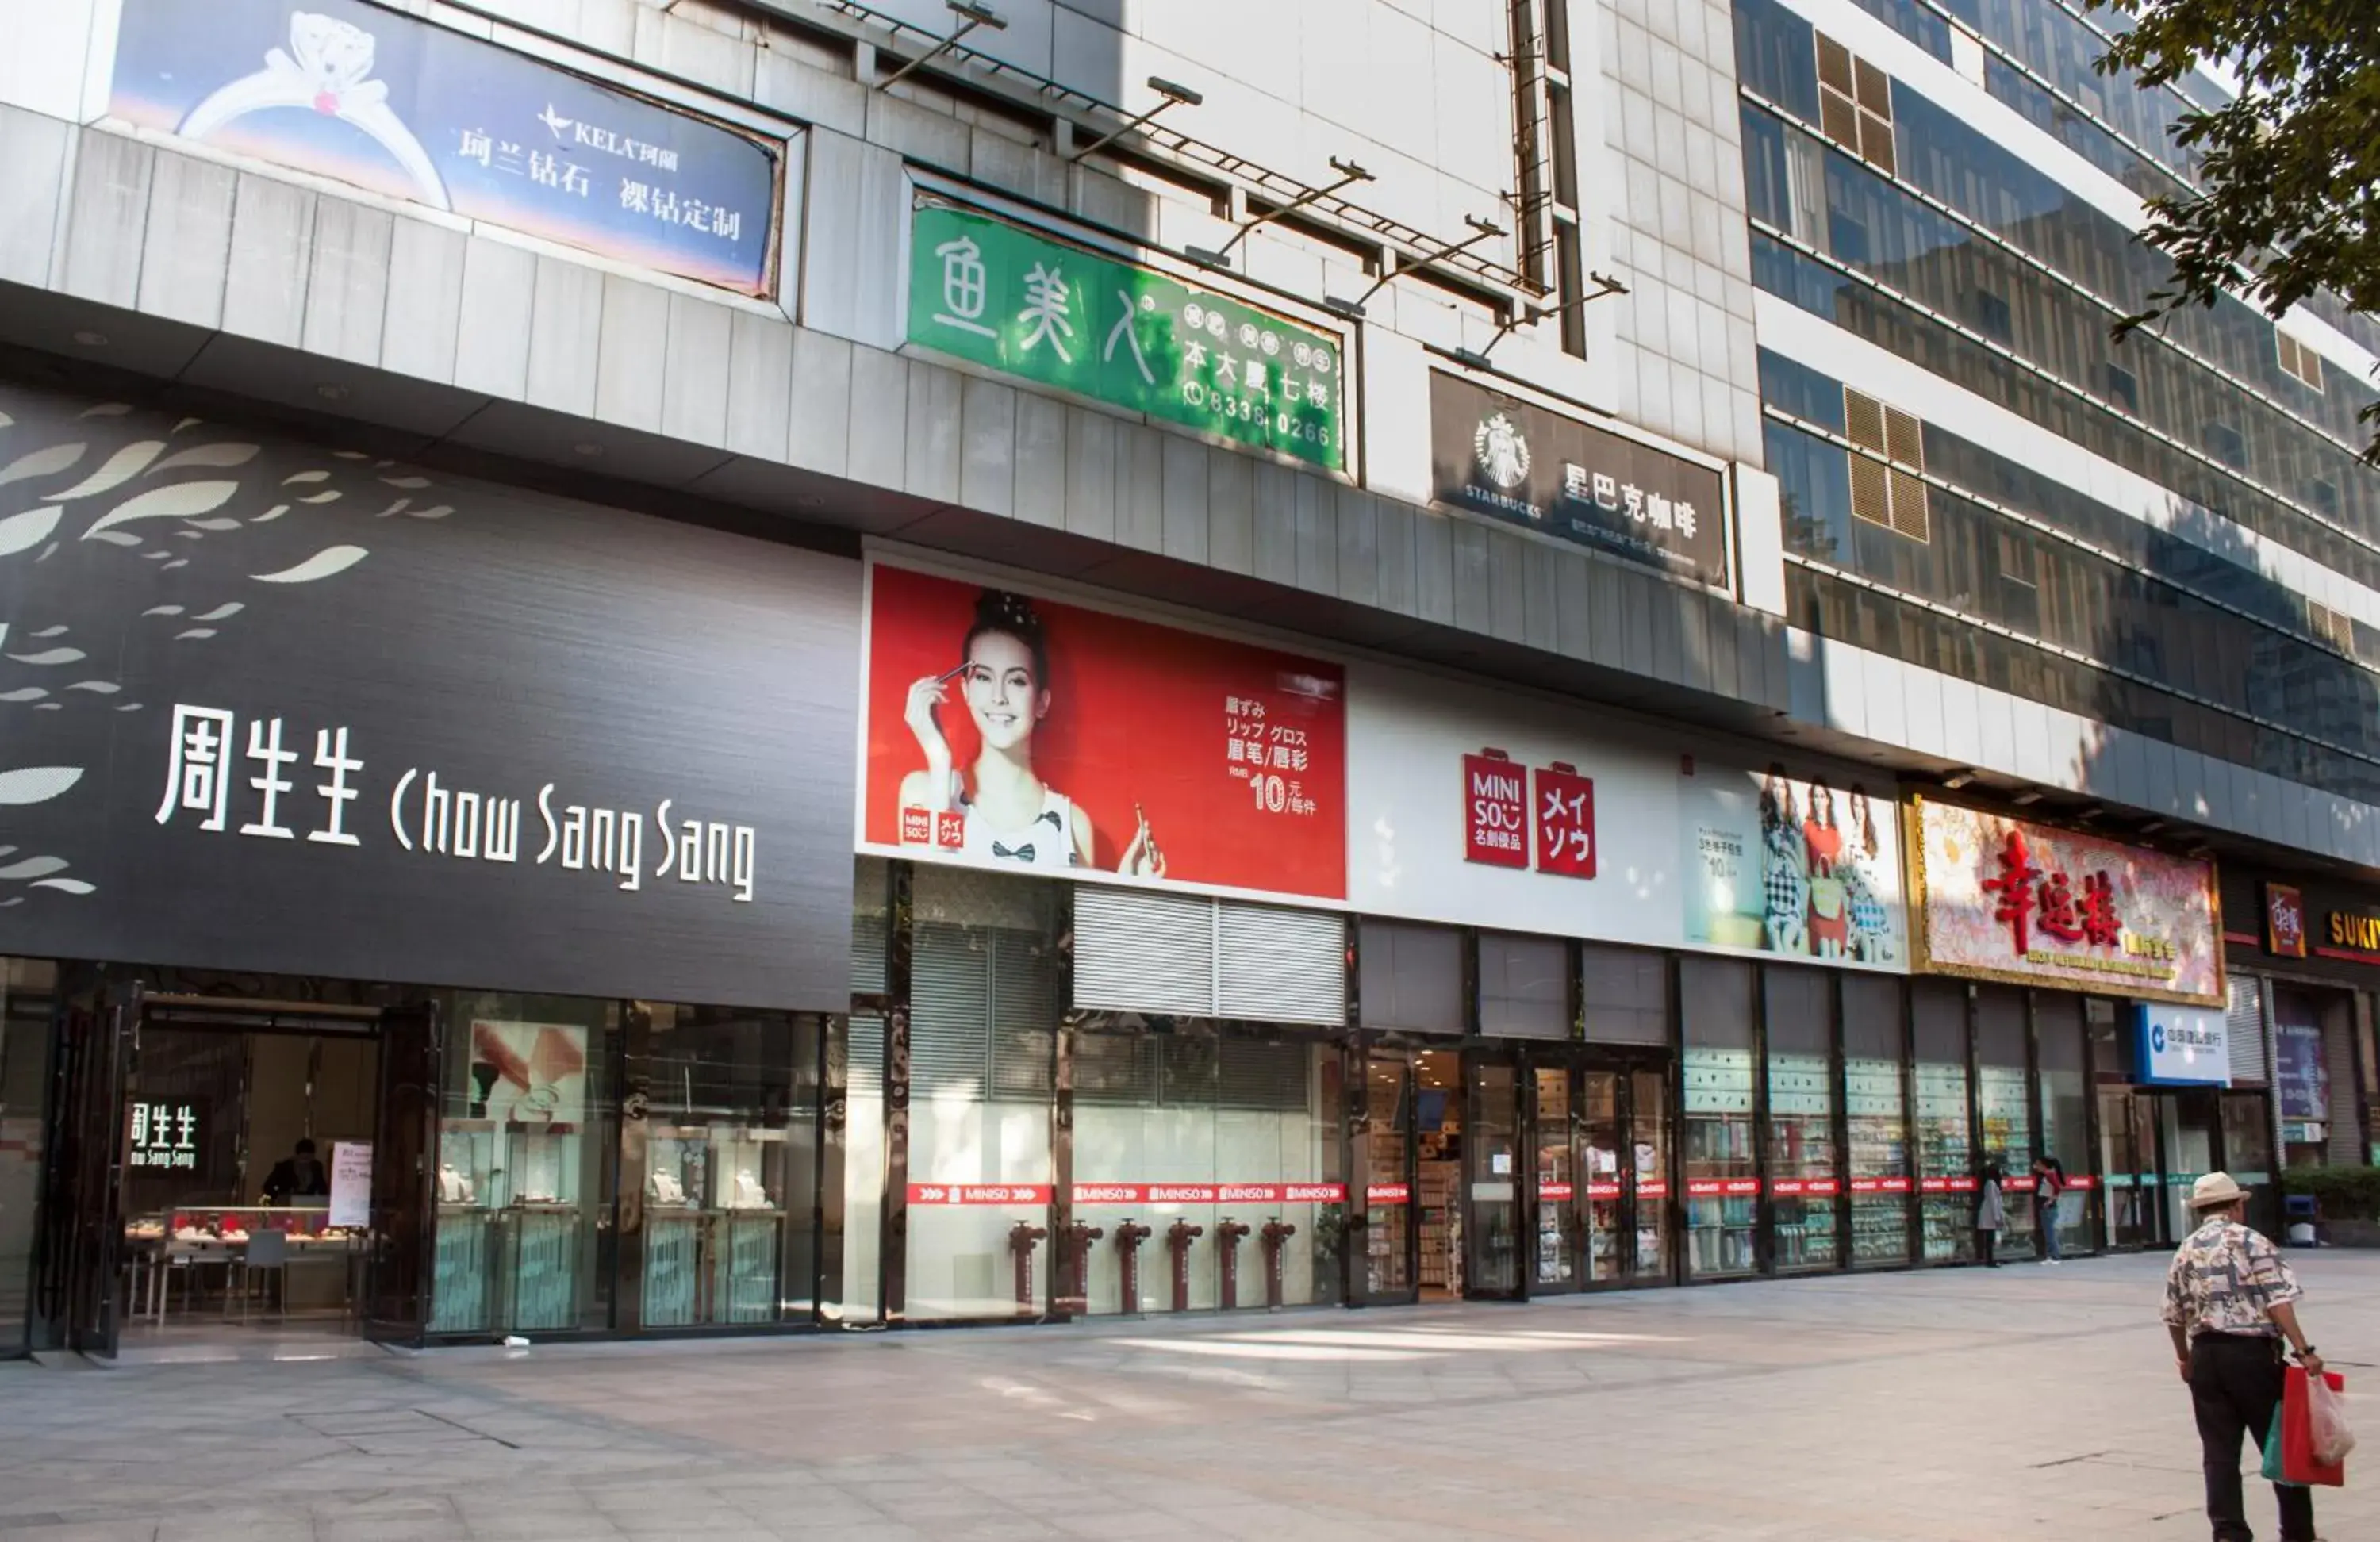 Property building in South & North International Apartment - Beijing Road -Free shuttle to Canton Fair